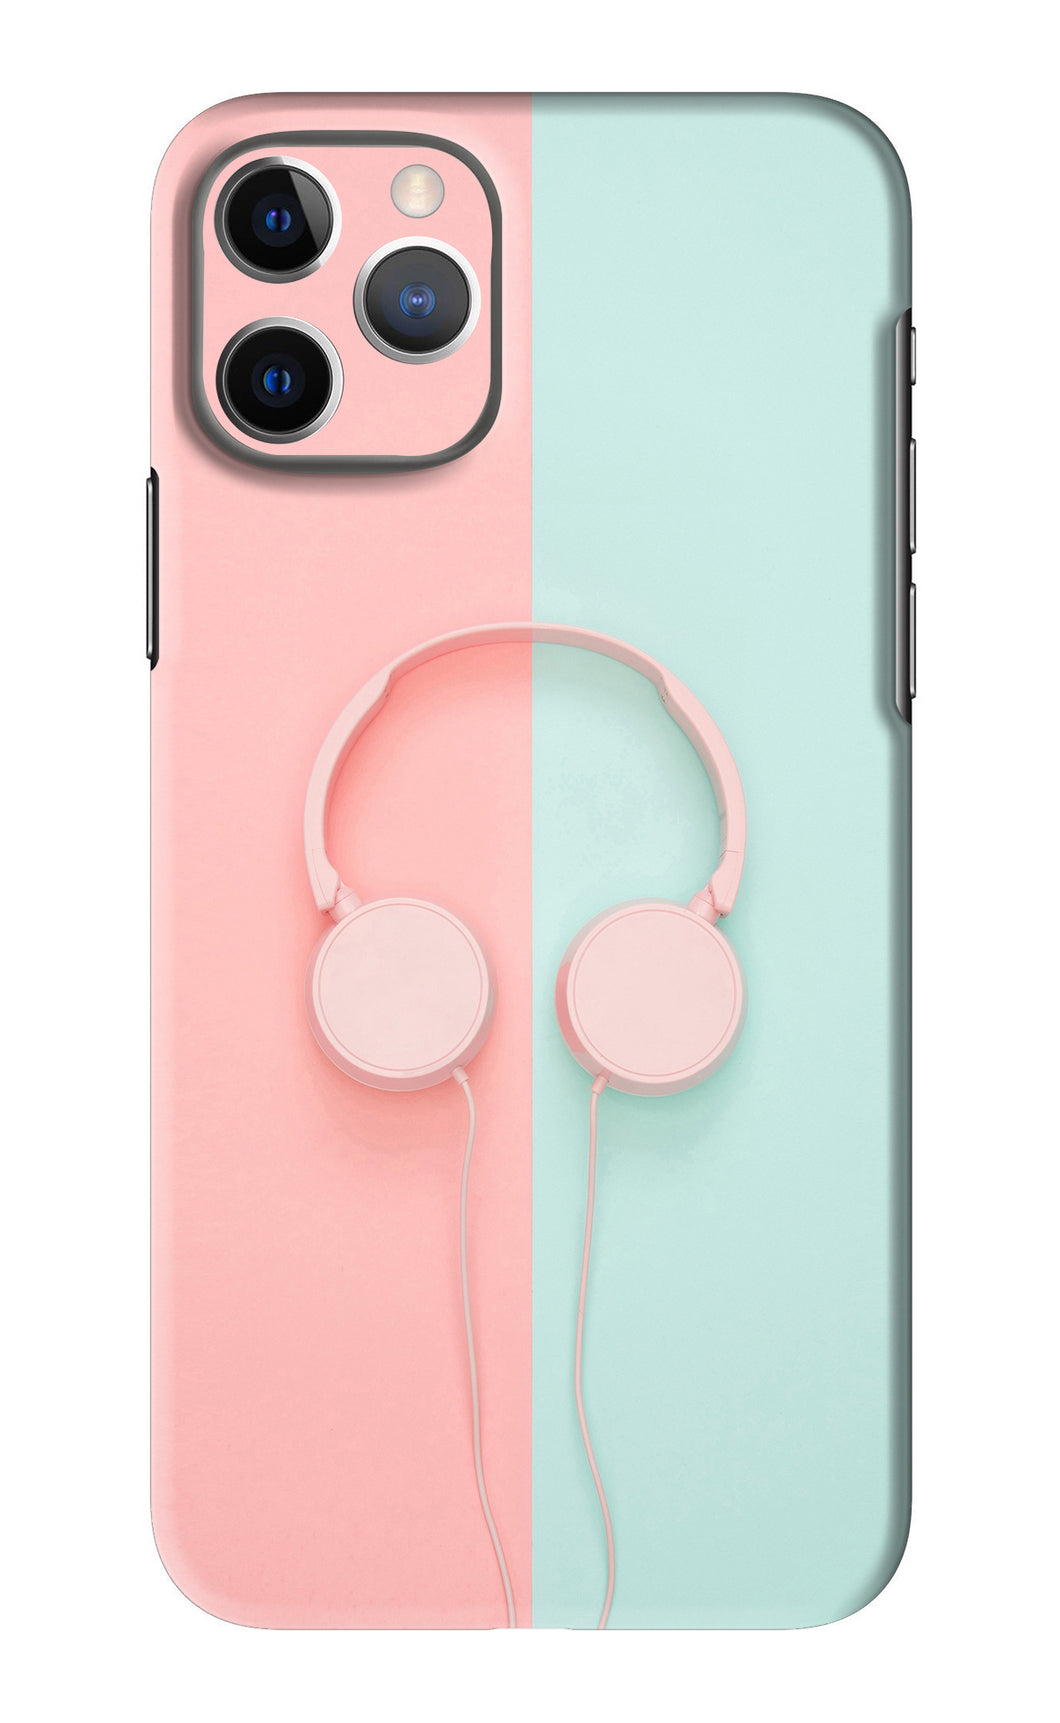 Music Lover iPhone 11 Pro Back Skin Wrap